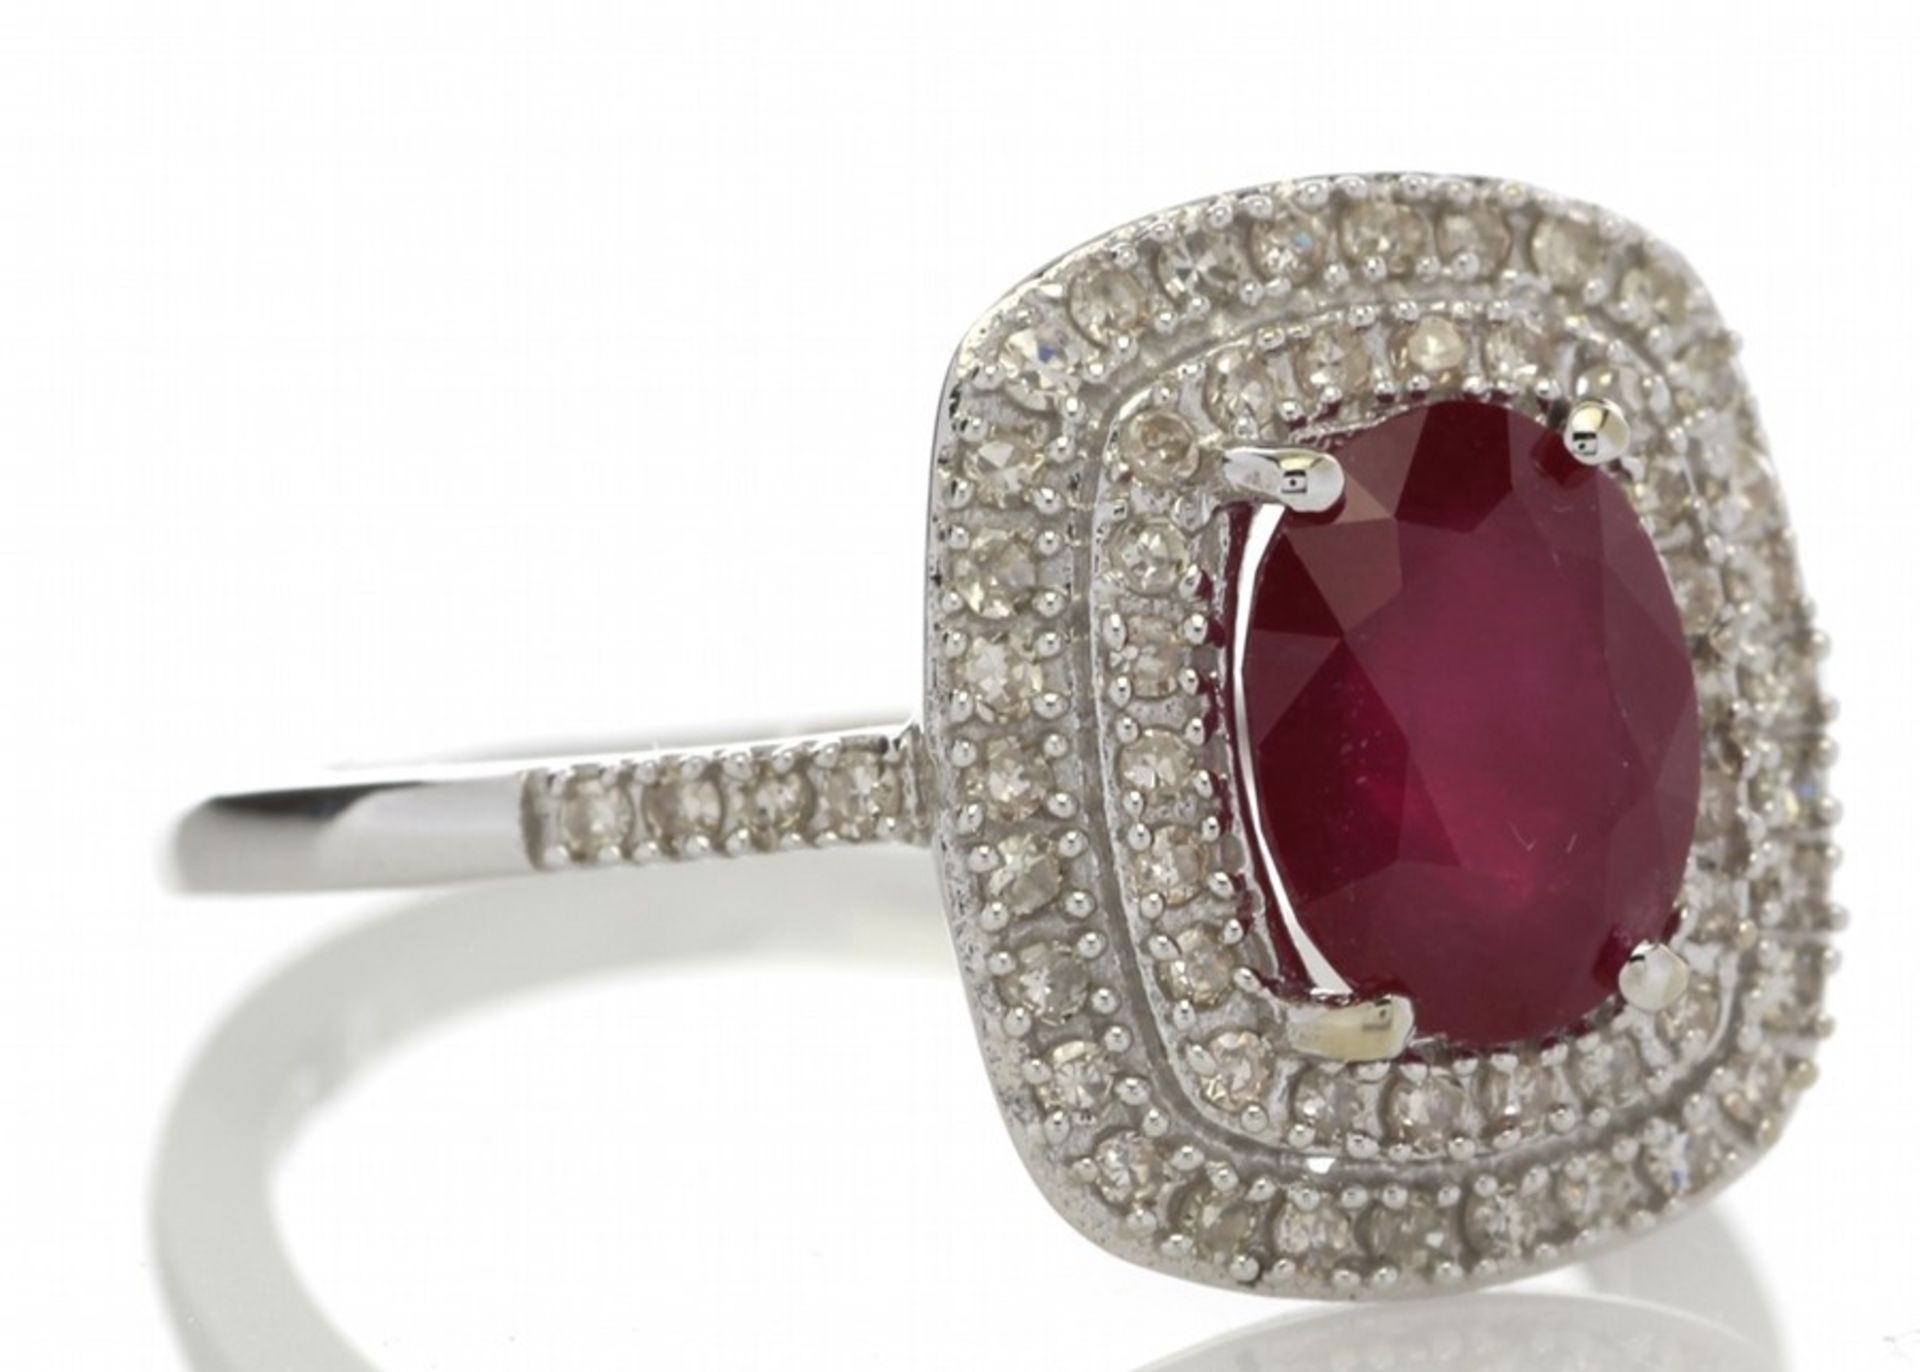 9ct White Gold Oval Ruby And Diamond Cluster Diamond Ring Valued by GIE £3,470.00 - Image 4 of 5